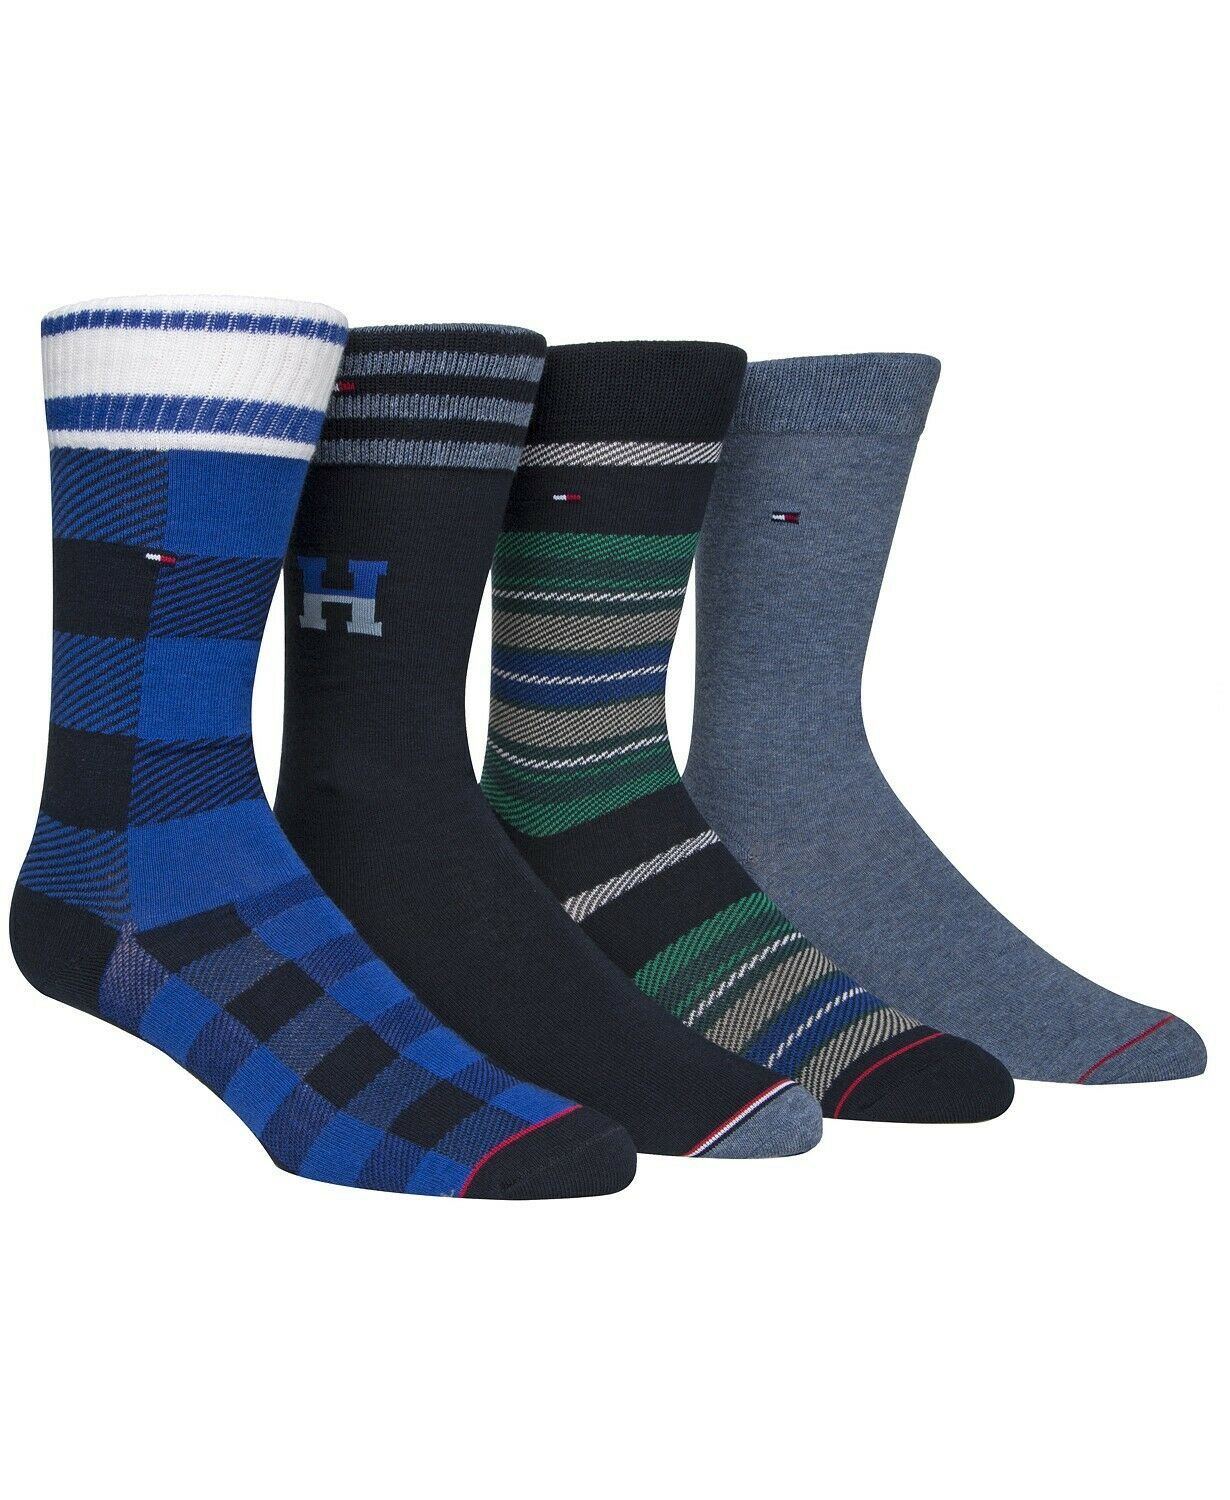 Tommy Hilfiger Men's 4-Pk. Premium Casual, Holiday Socks Multicolor Size  7-12